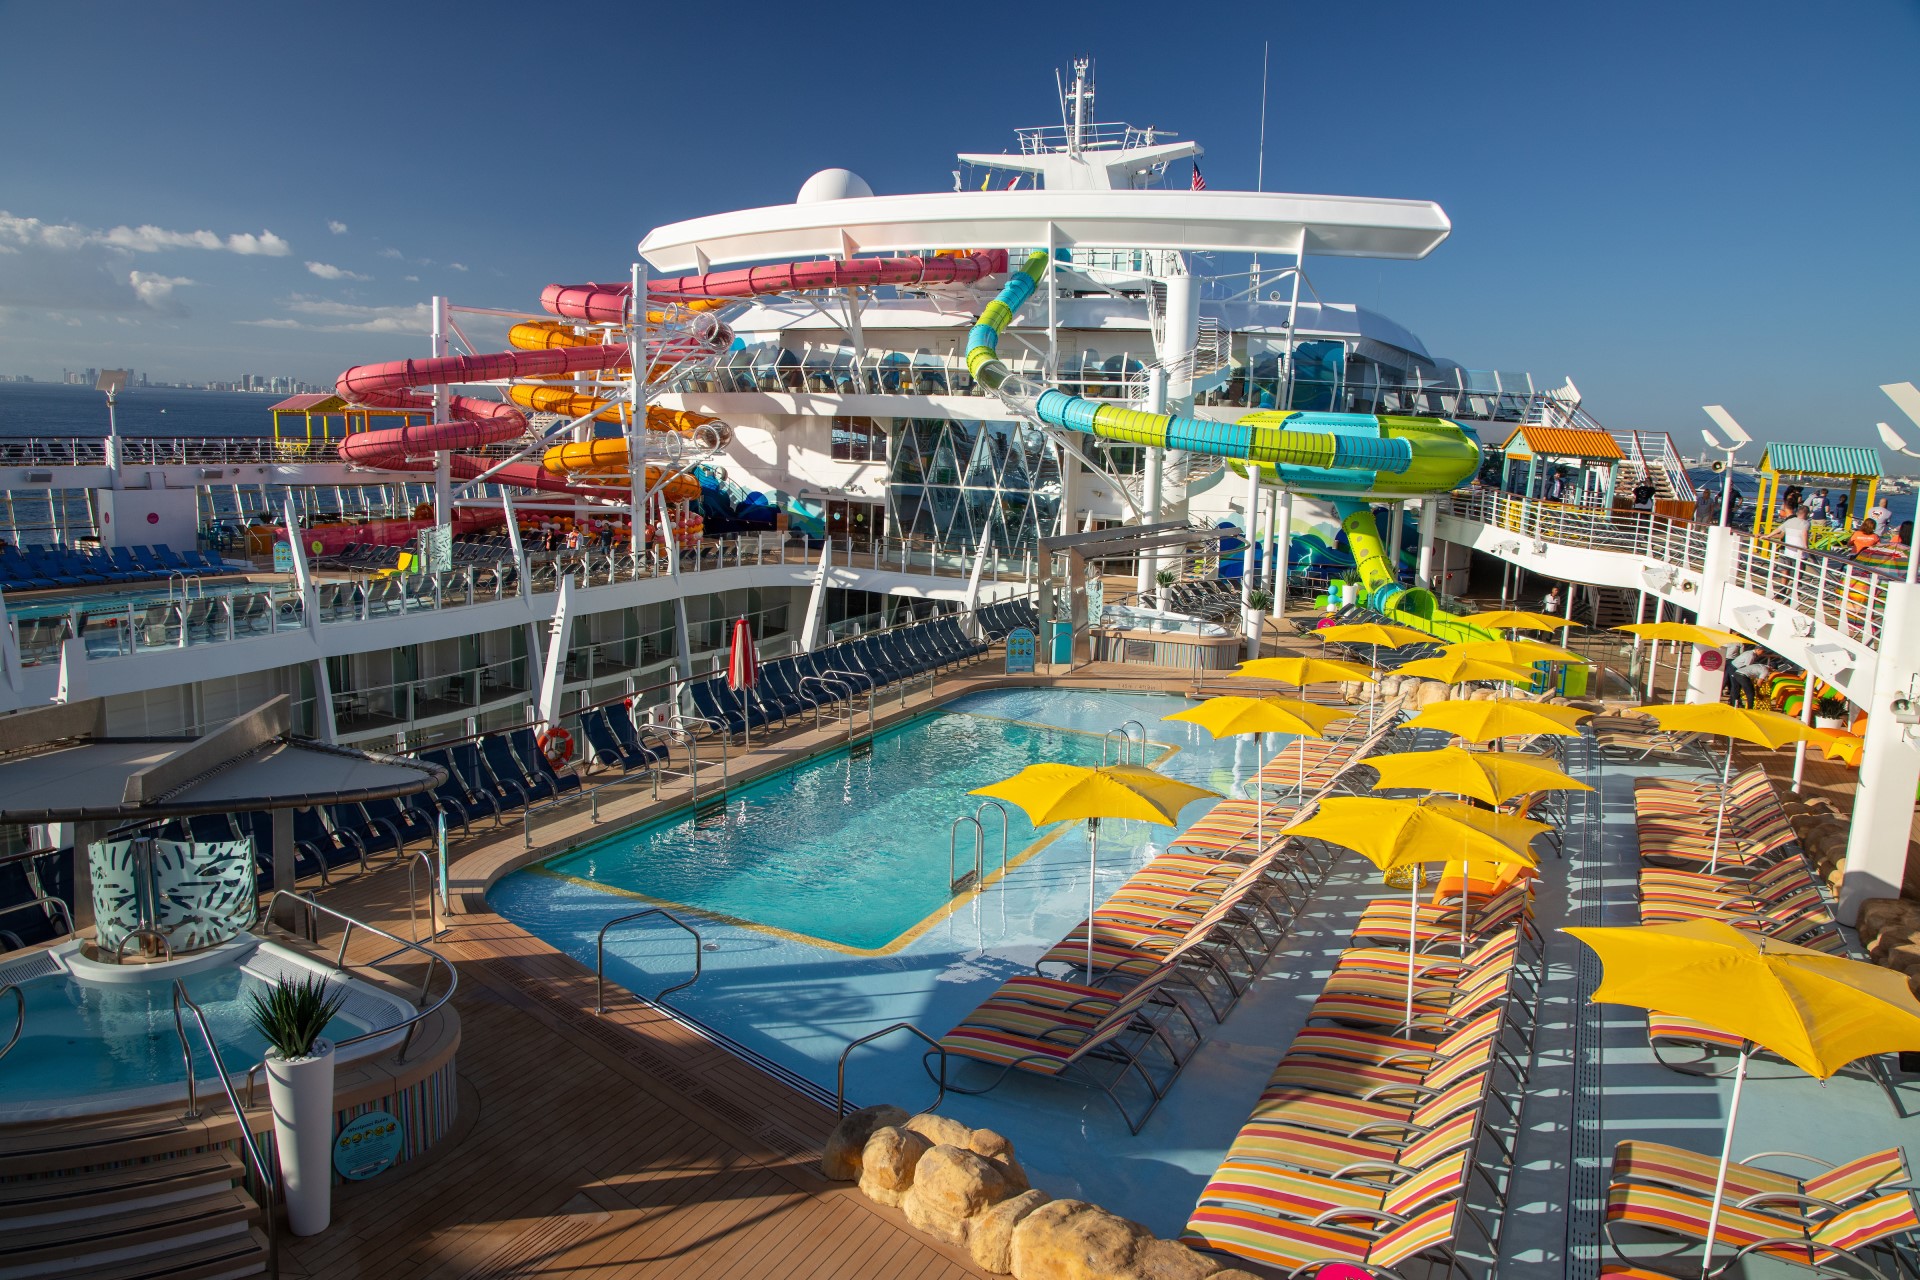 Oasis of the Seas Debuts Revitalized Top Deck Thrills Designed by Martin Aquatic